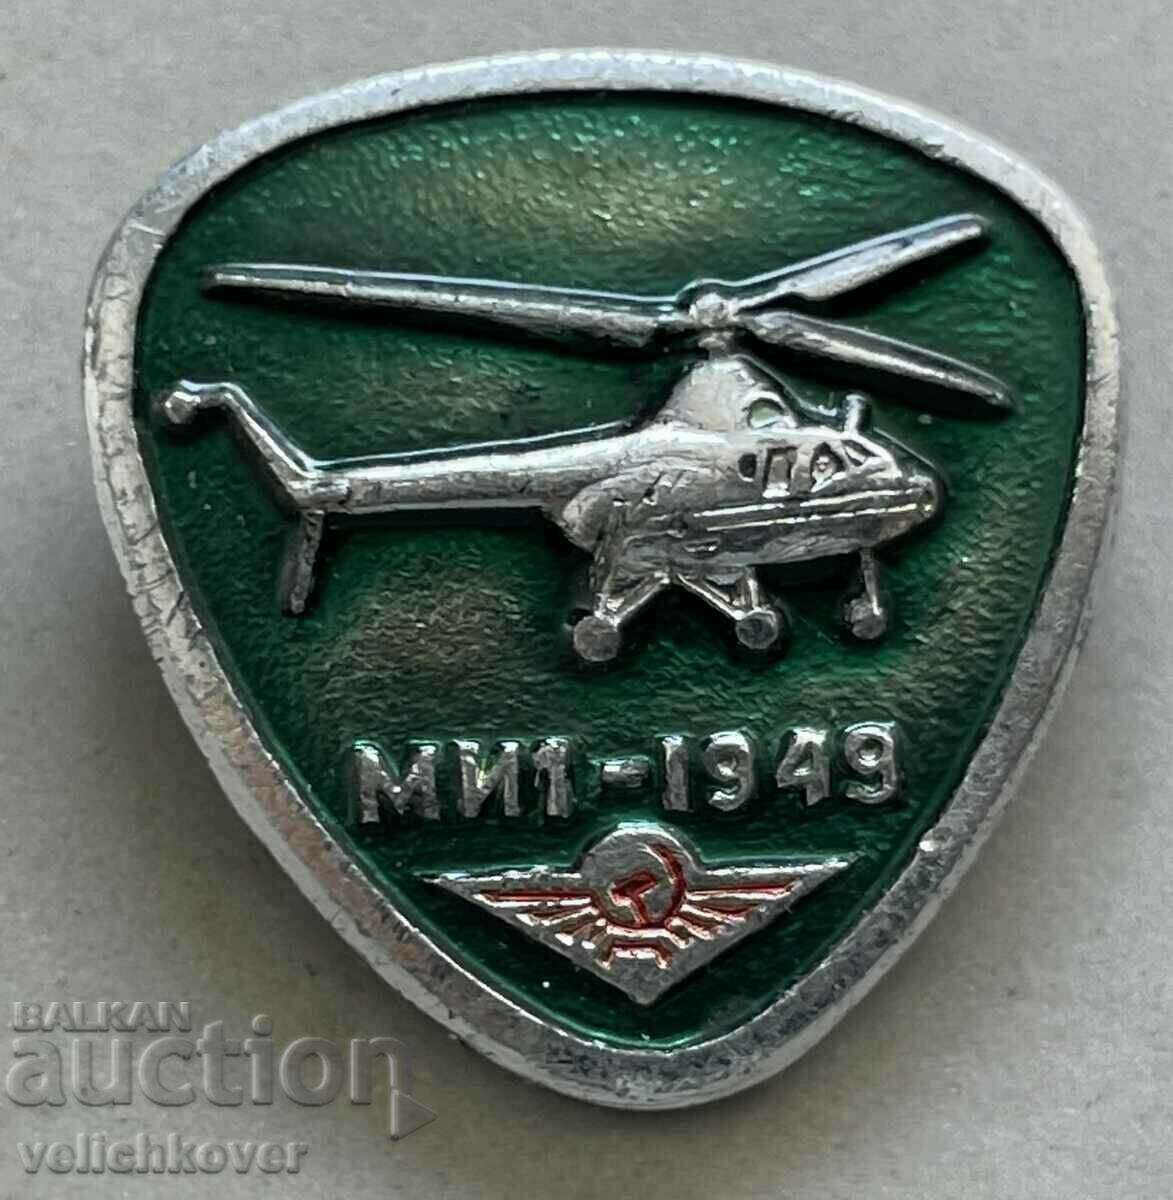 35367 USSR insignia helicopter model MI1 1949.